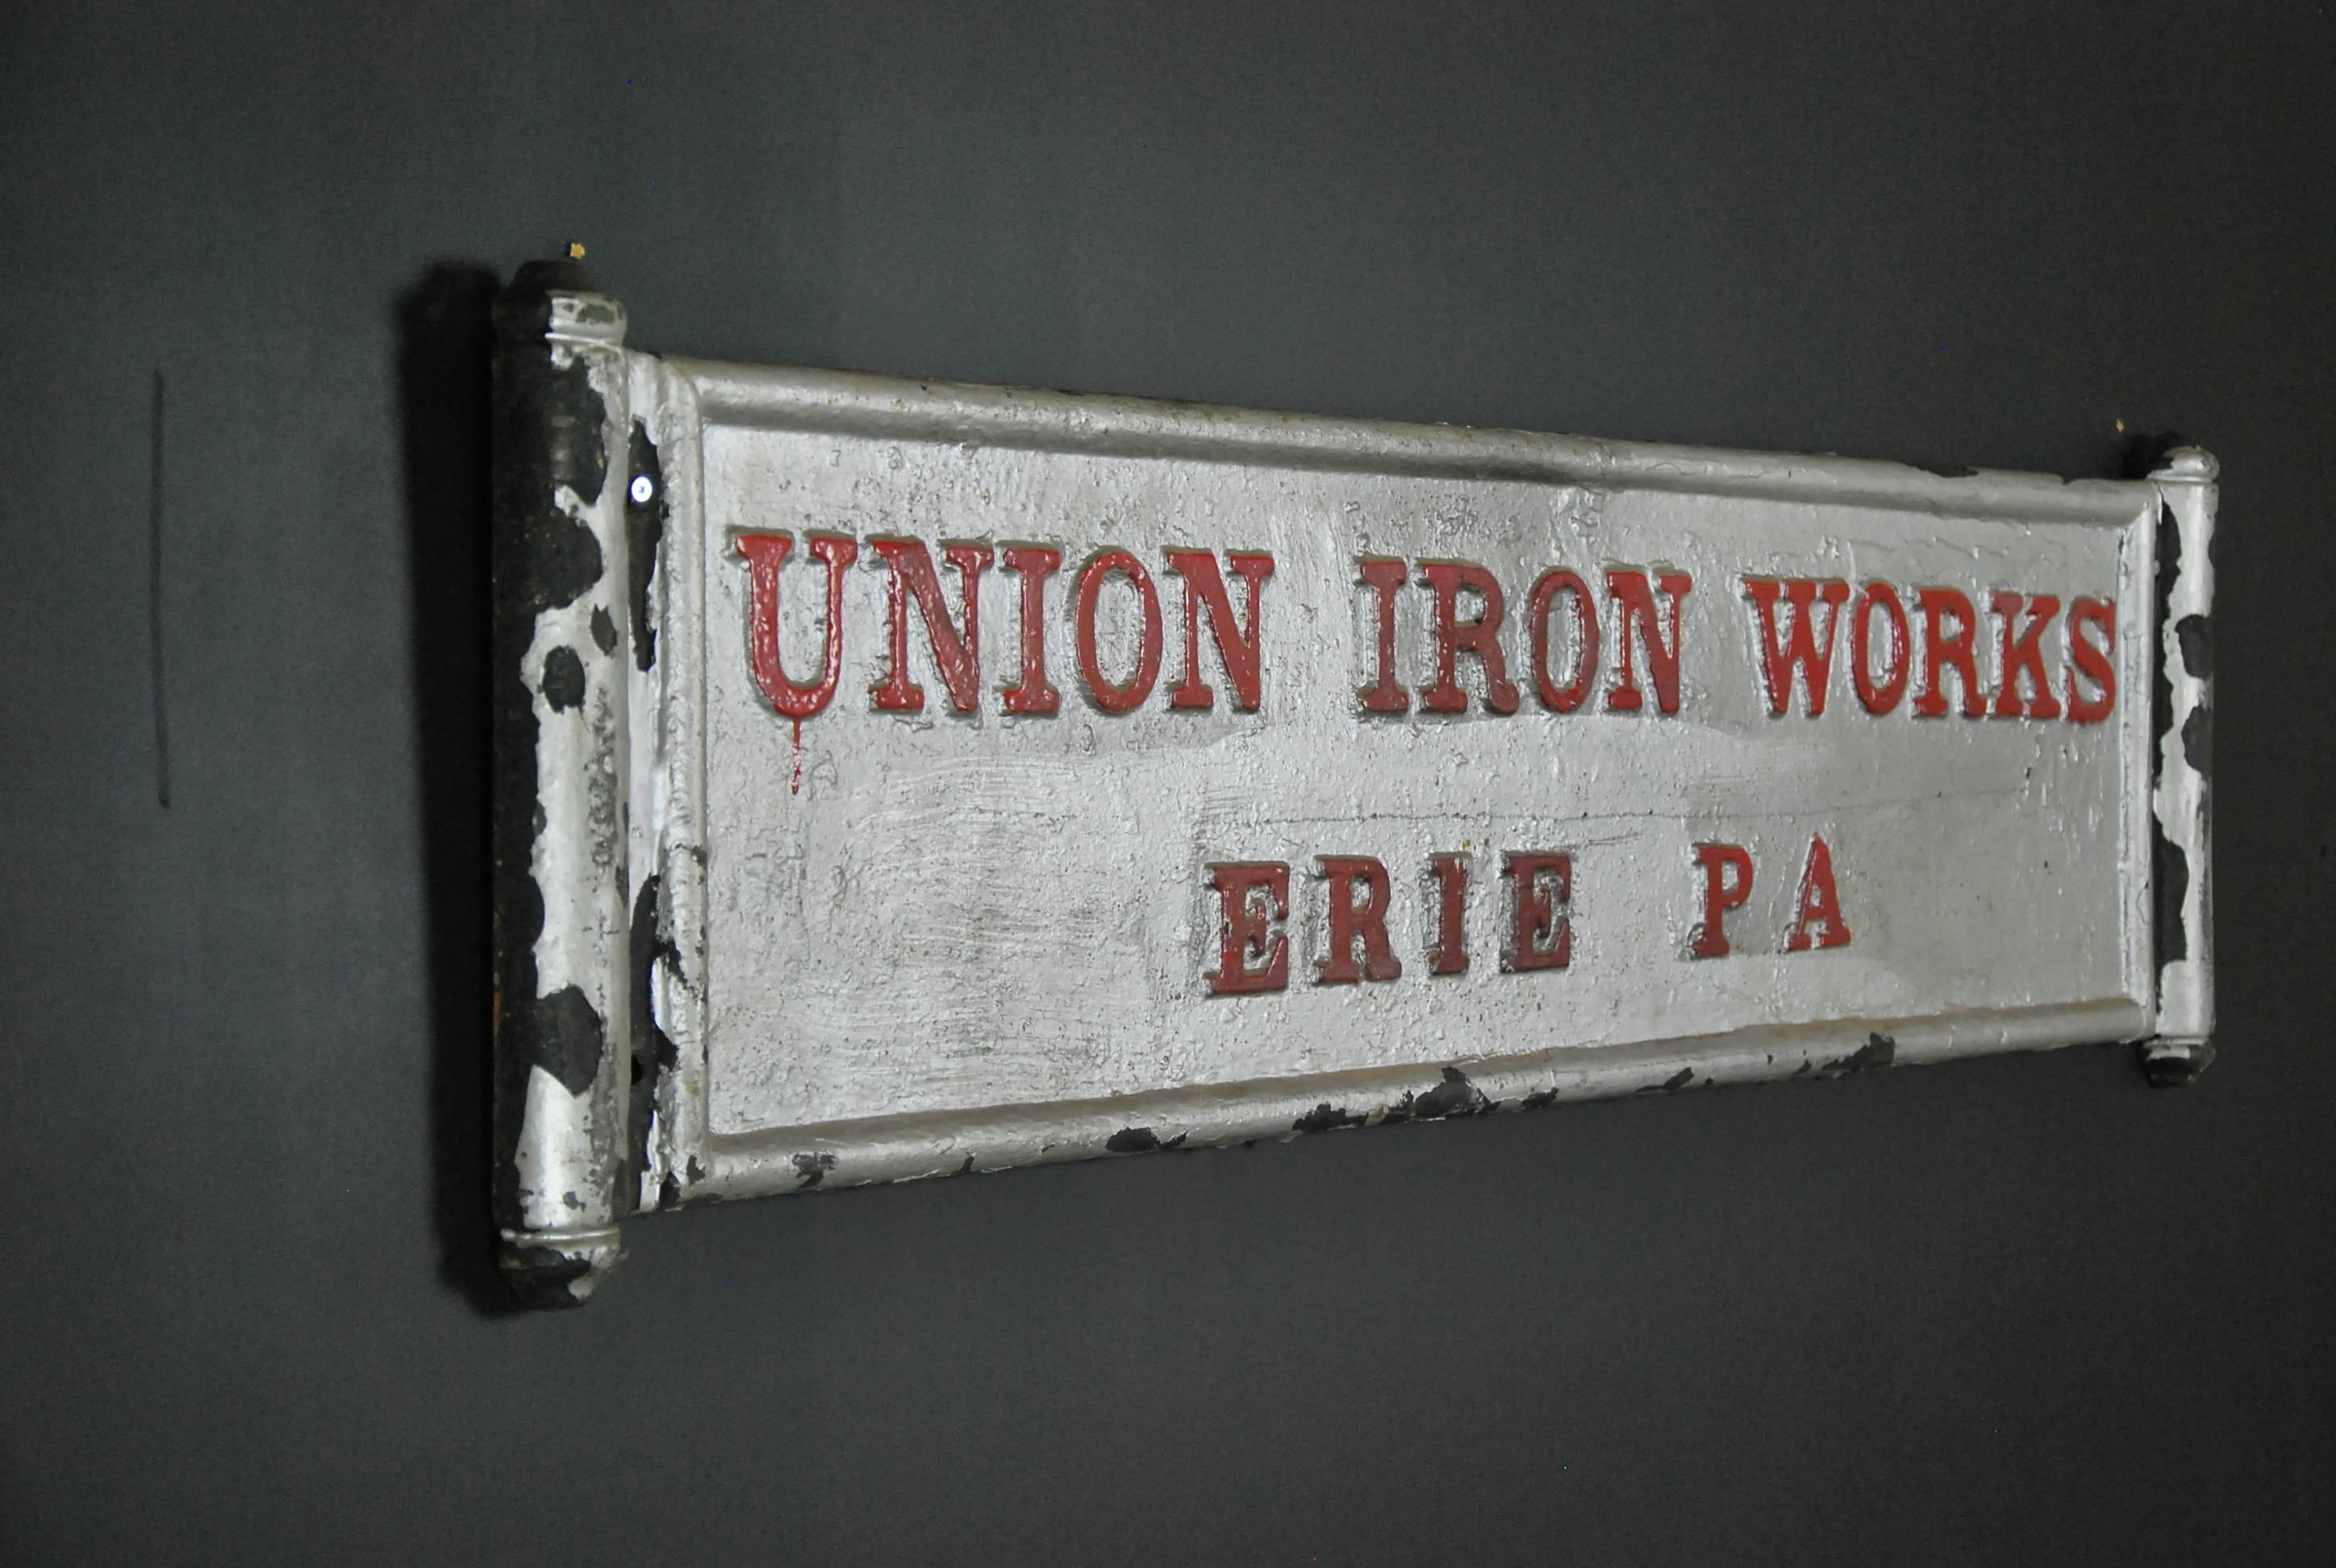 Cast iron wall plaque, in original paint, depicting the 'Union Iron Works Co.' of Erie, PA. This heavy cast sign is in perfect condition and likely graced one of the old mills in steel country. A valuable piece of American history.